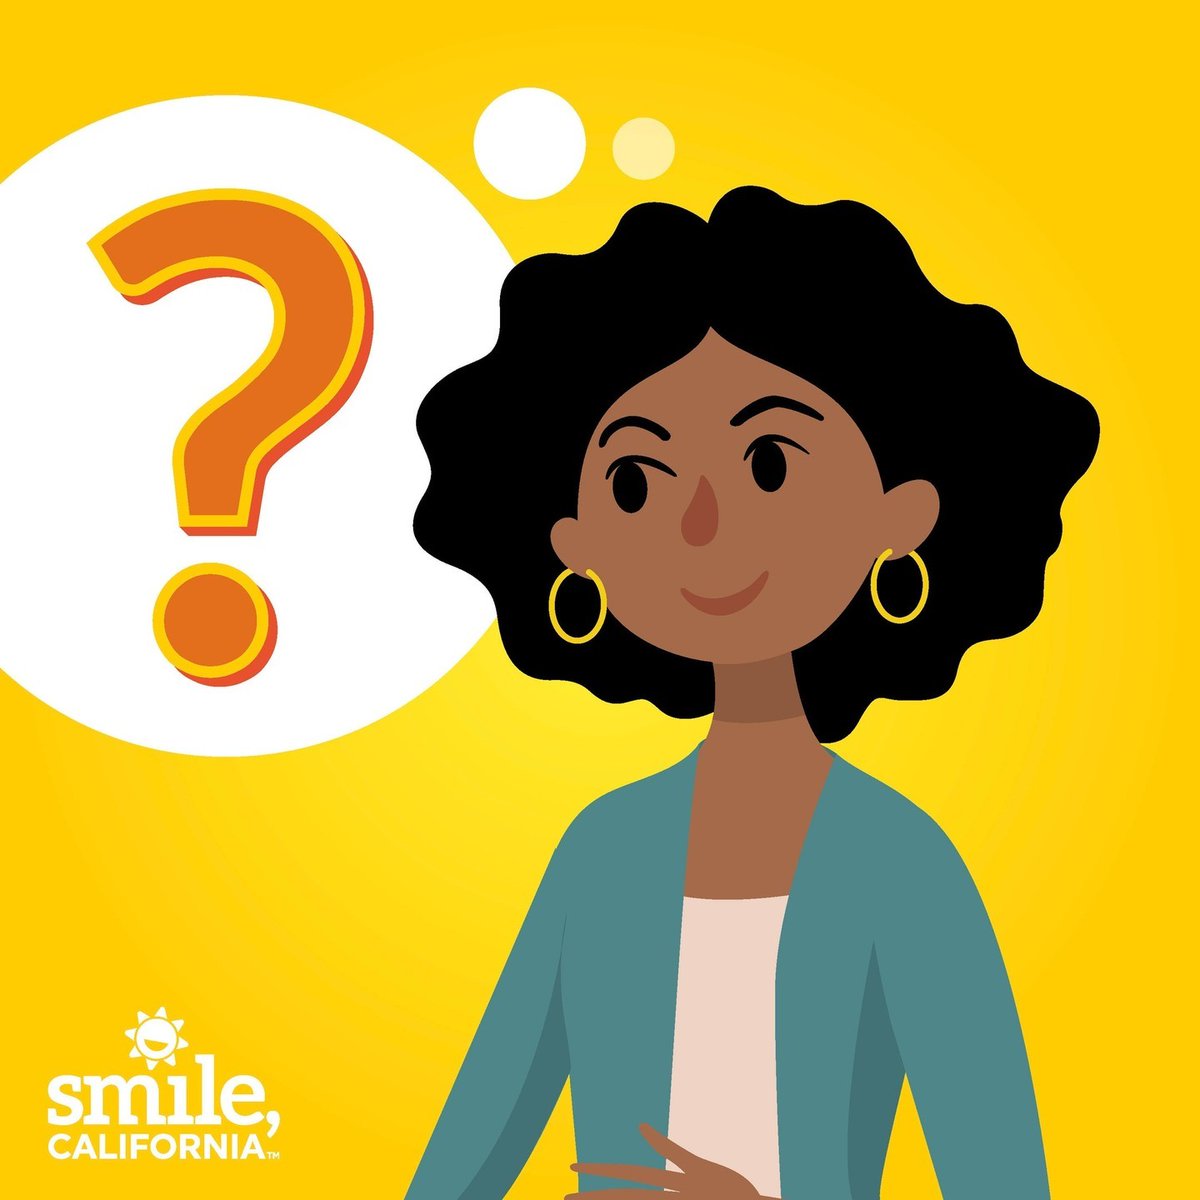 DYK: @MediCal_DHCS Dental offers free services for enrolled members? Have questions about dental benefits? 📲 More on Smile CA's coverage: smilecalifornia.org/covered-servic…